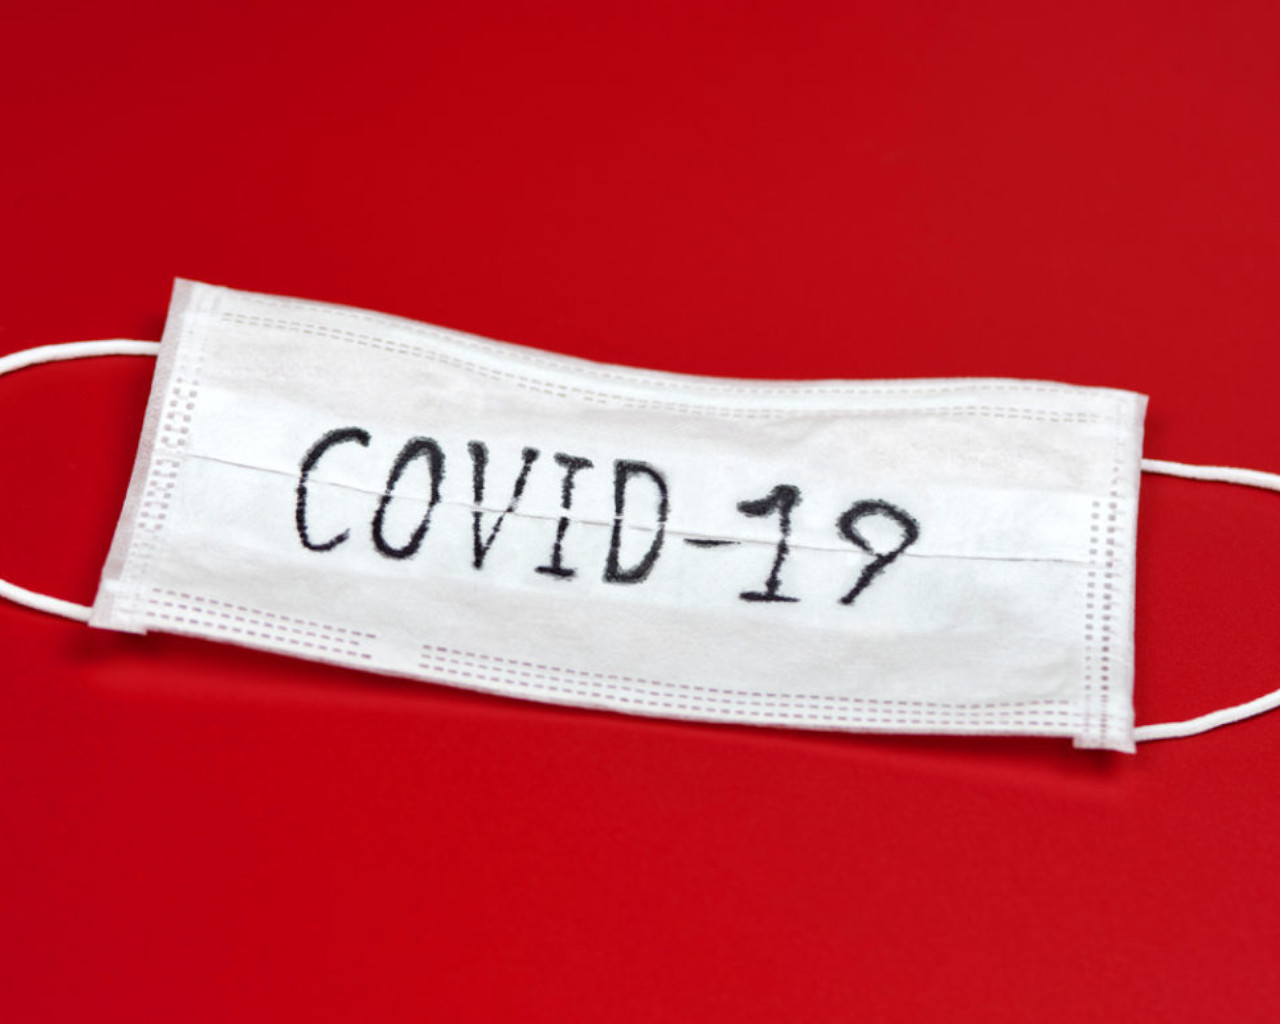 covid-19 θεραπεια,covid 19 therapy update,covid 19 therapy drugs,covid 19 therapy ppt,covid-19 therapy (recovery) trial,covid 19 therapy review,covid 19 therapy activities,covid 19 therapy news,covid 19 therapy guideline